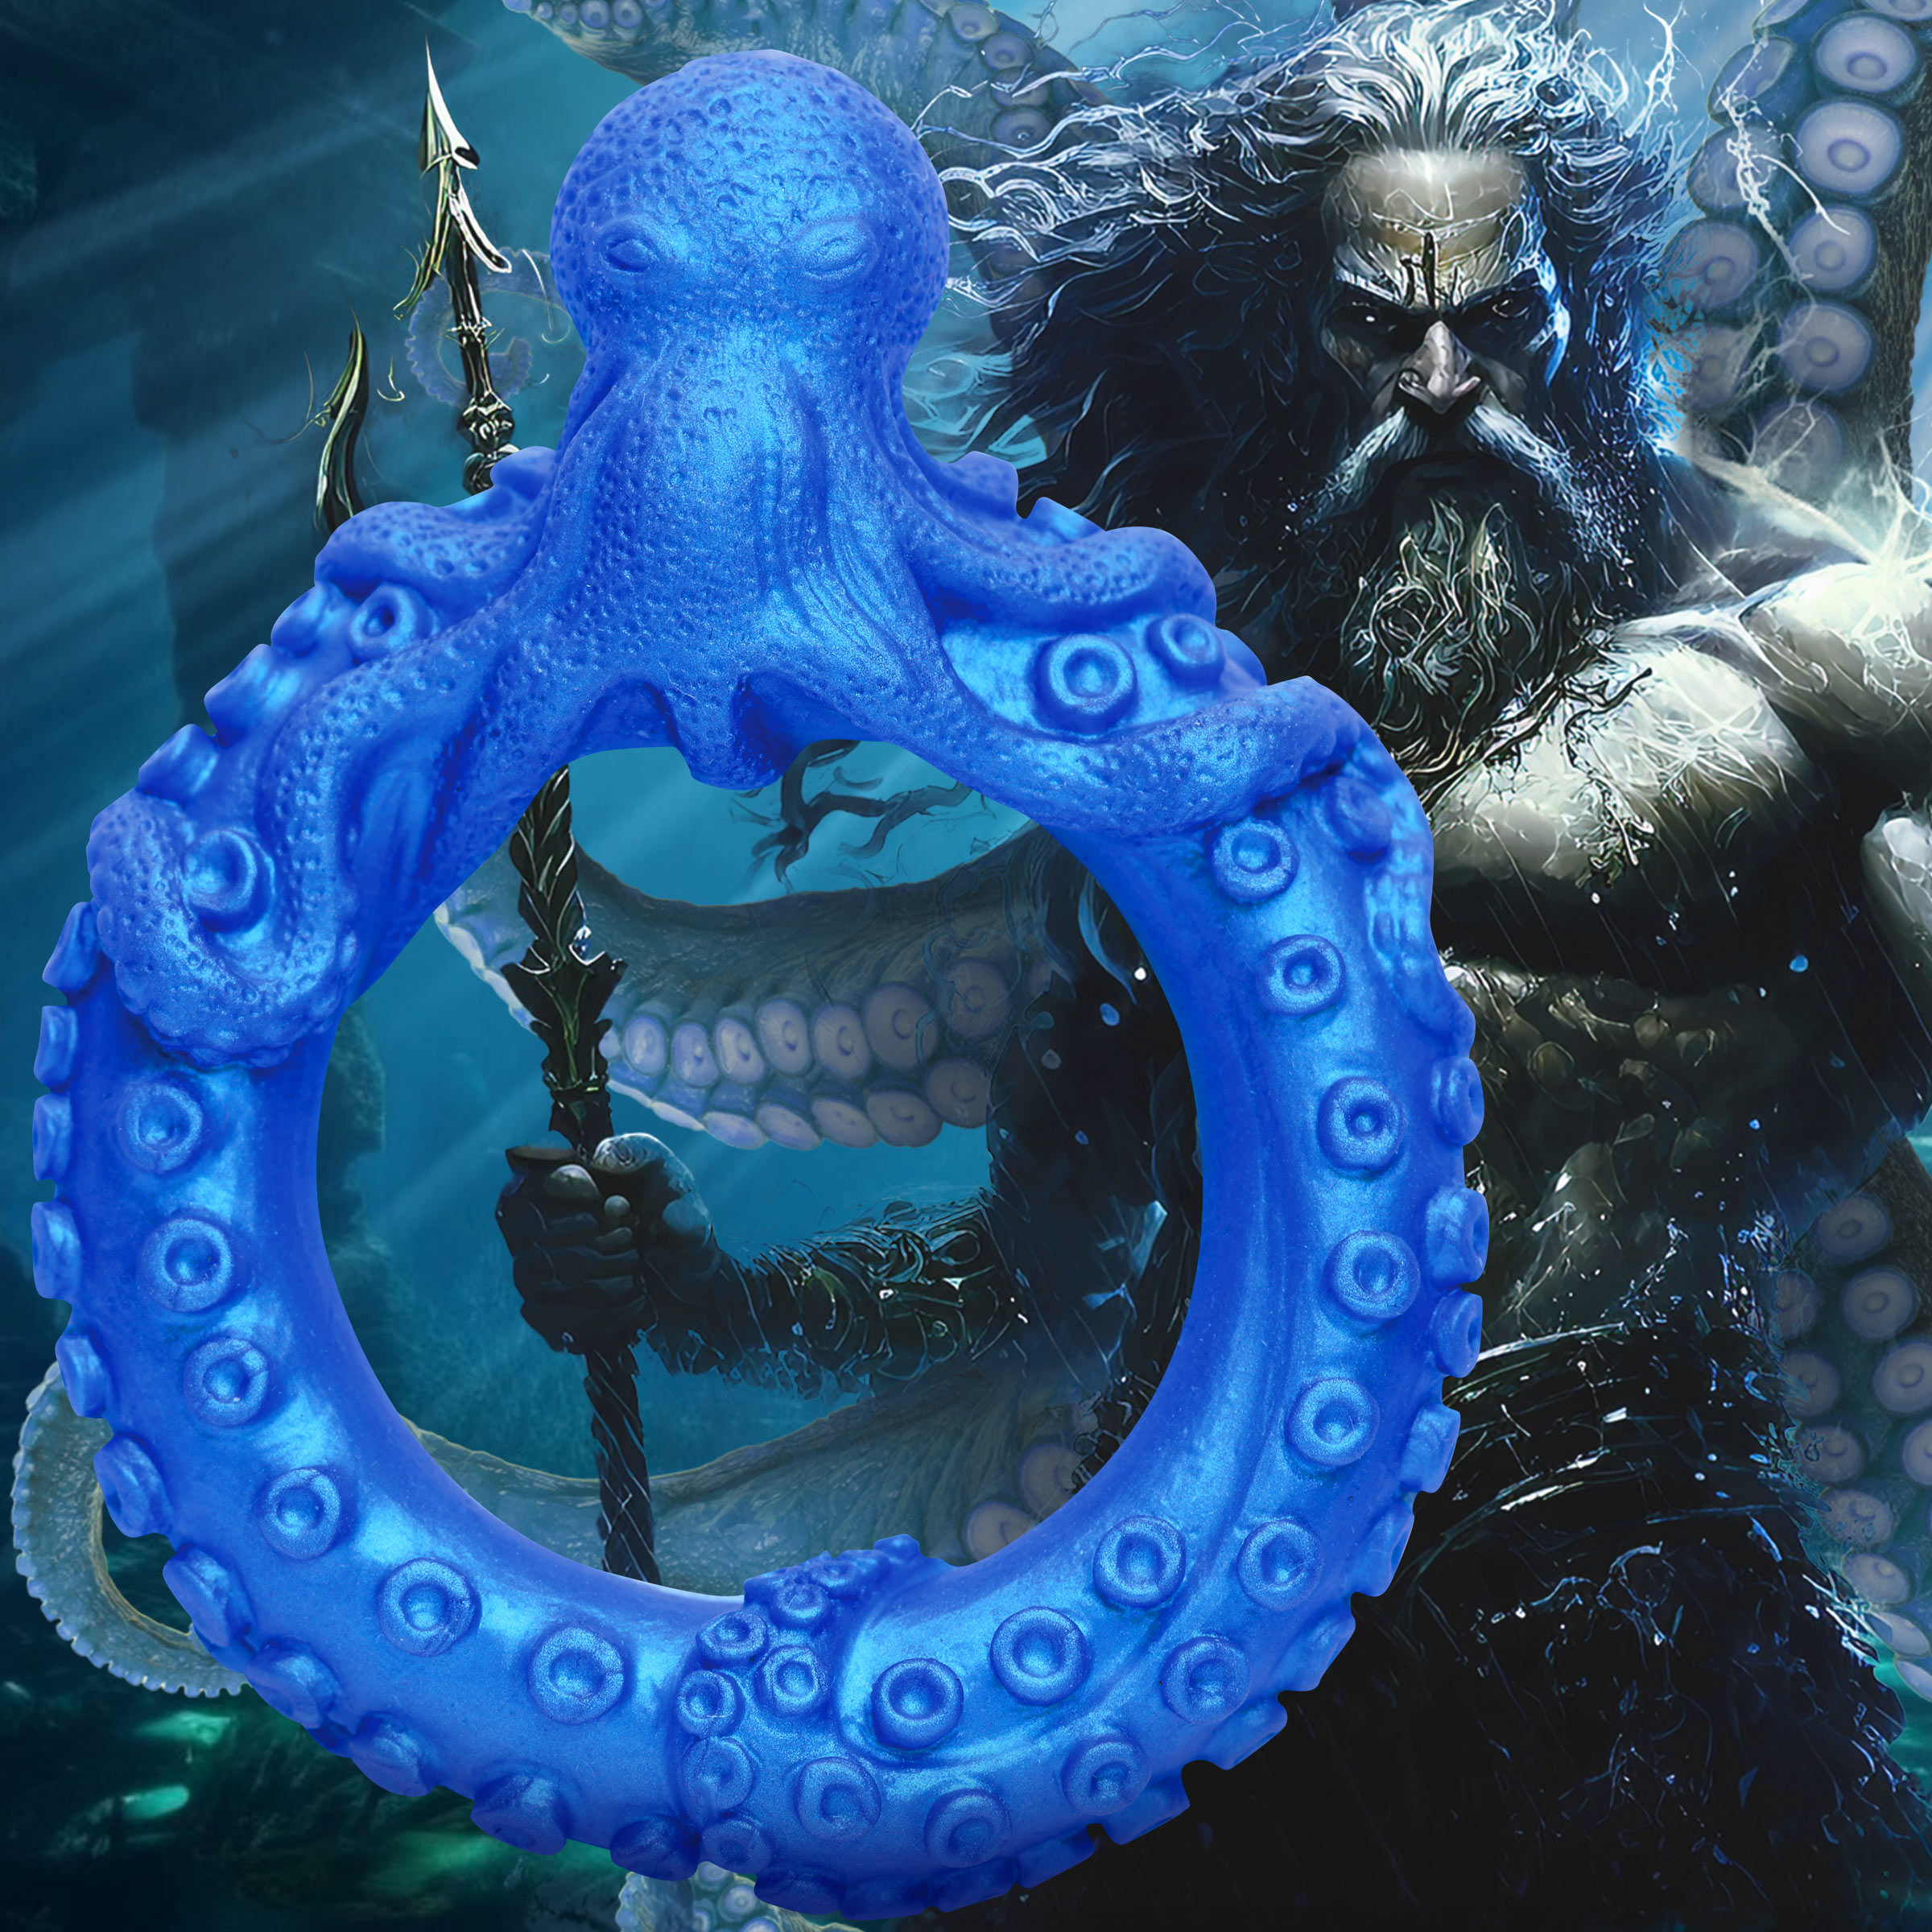 Decorate your dong with this fantasy C-ring! Poseidon's Octo-Ring is made out of super stretchy and plush silicone that is phthalate-free and body-safe. The brilliant blue really stands out when you're wearing the ring and the little octopus and its tentacles wrap around your shaft. It can fit over the shaft along or also be stretched to fit around the shaft and under the balls